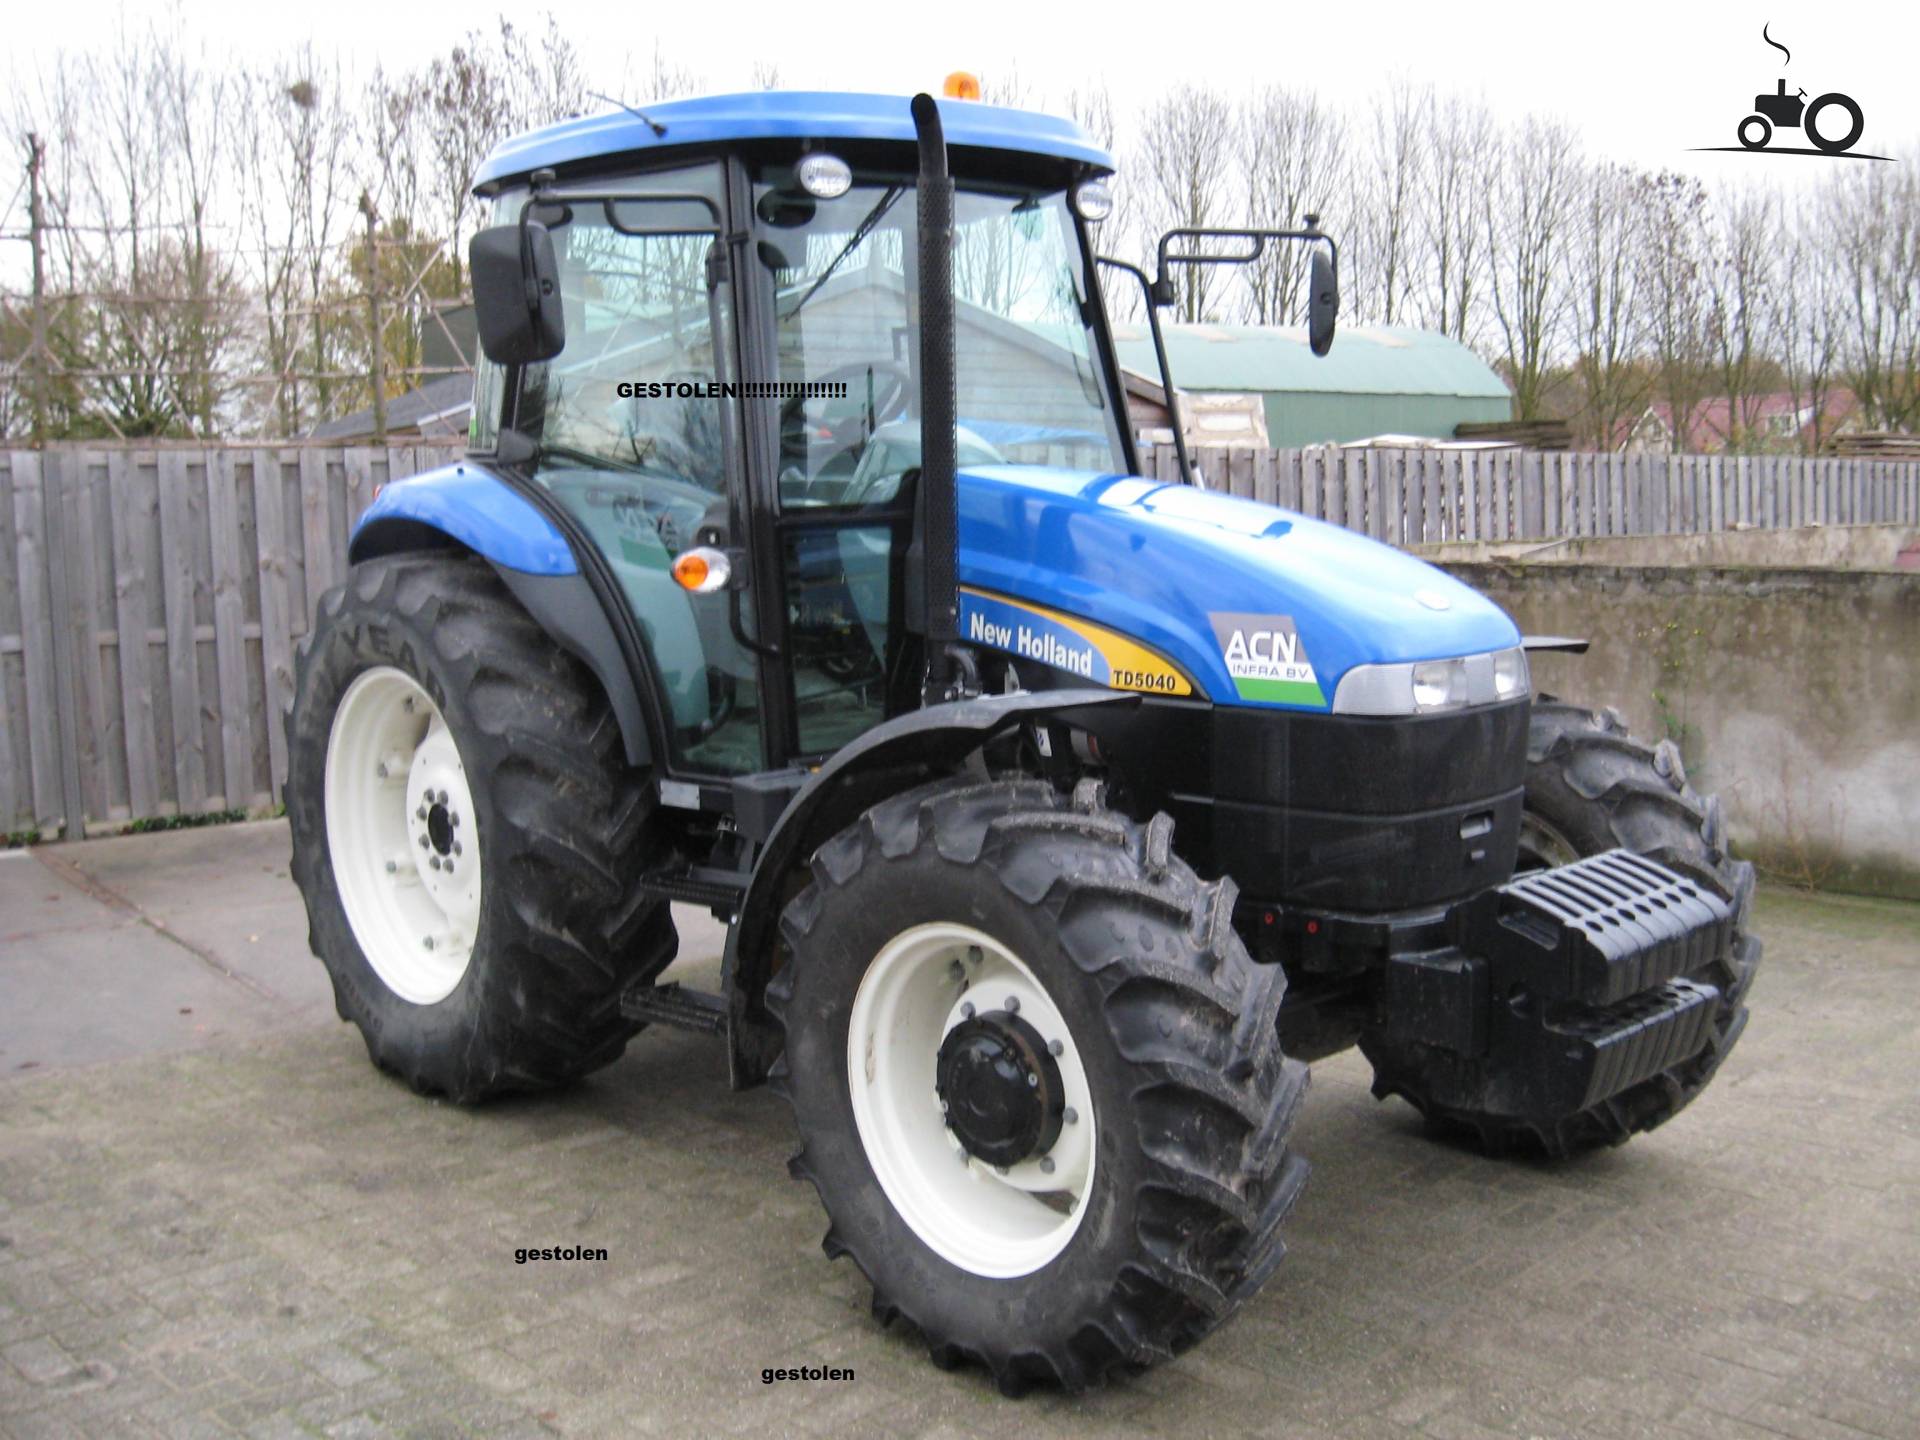 New Holland TD 5030 Specs and data - Everything about the New Holland ...